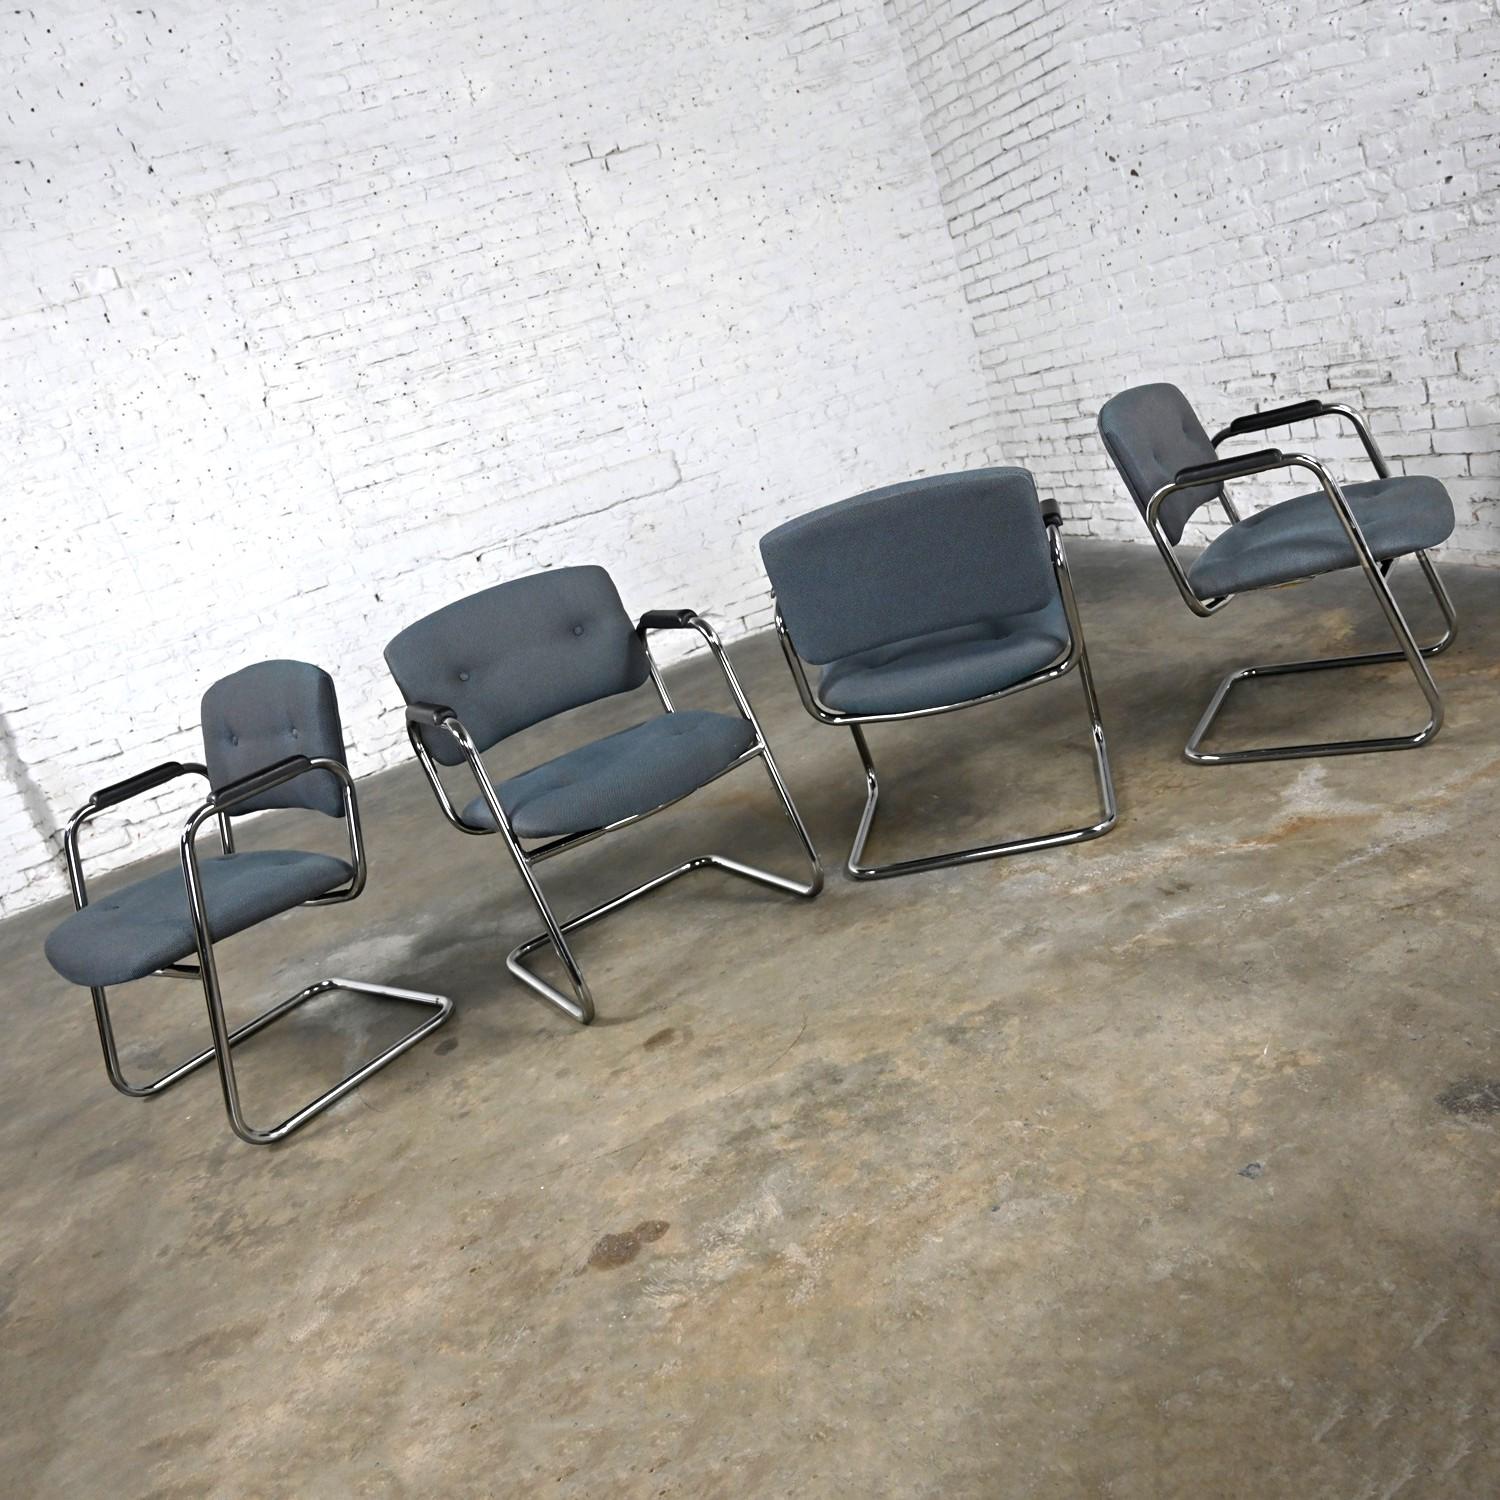 Late 20th Century Gray & Chrome Cantilever Chairs Style Steelcase Set of 4 In Good Condition For Sale In Topeka, KS